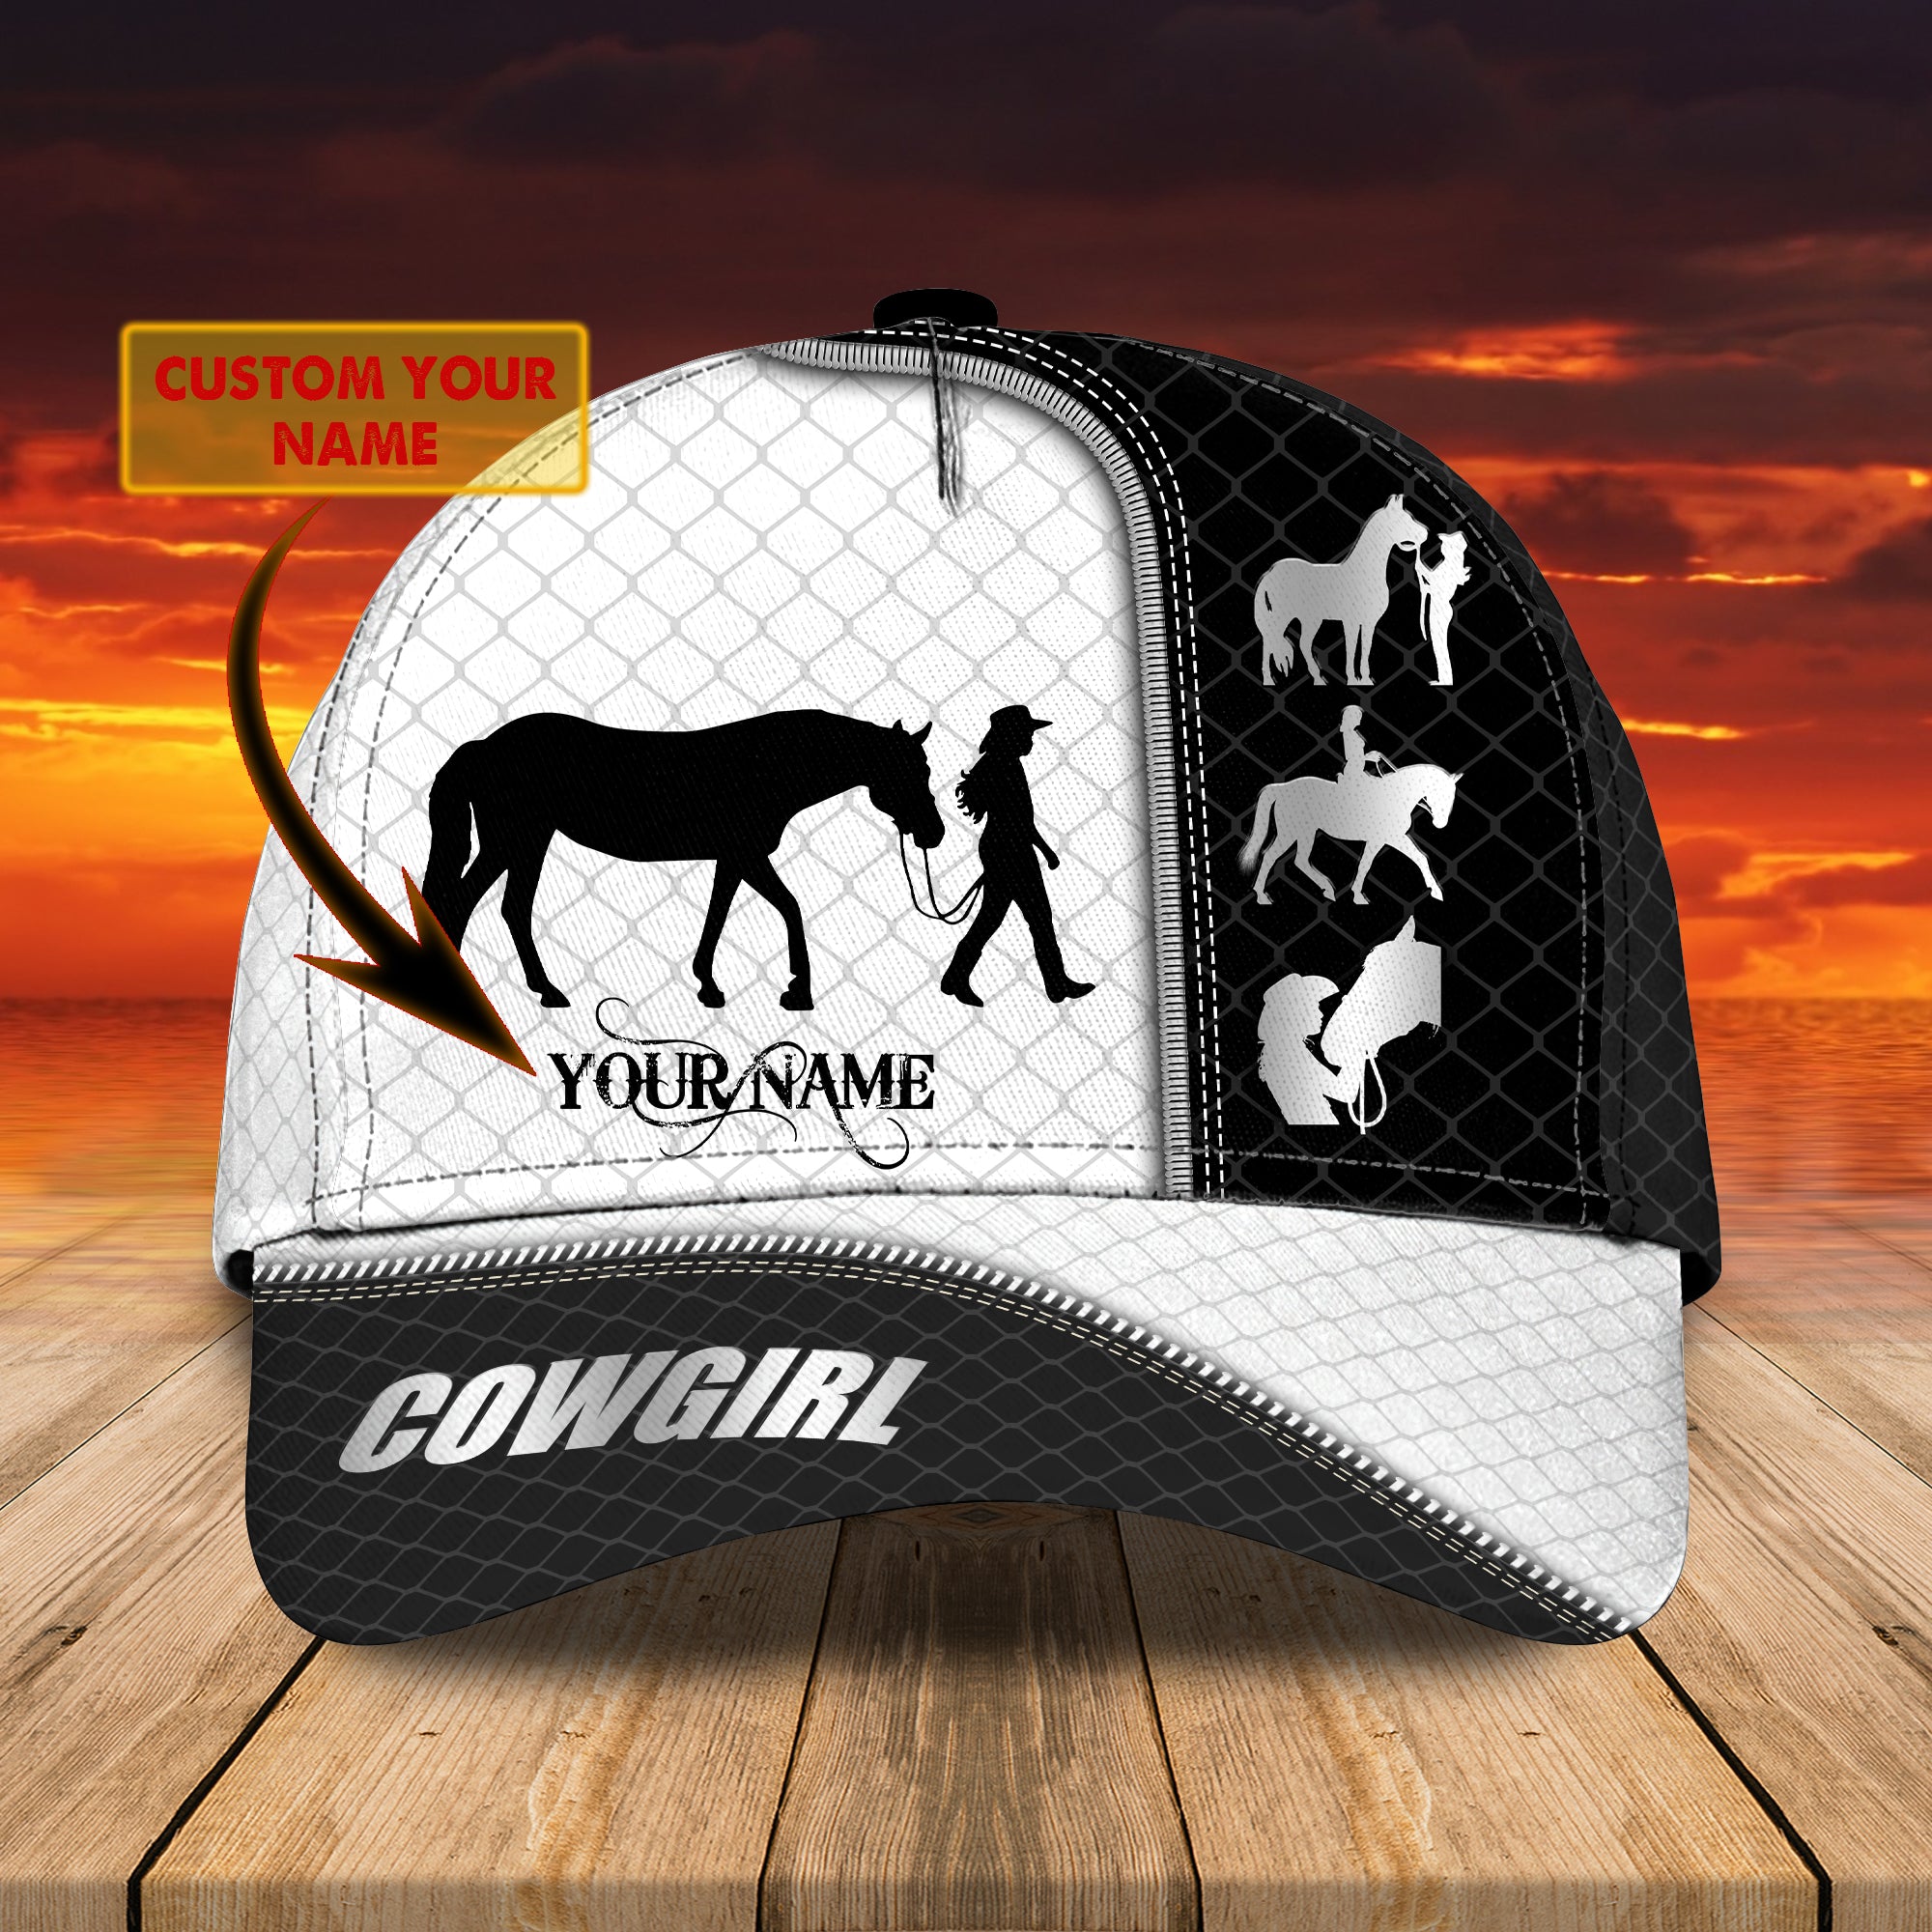 COWGIRL - Personalized Name Cap - H98 098